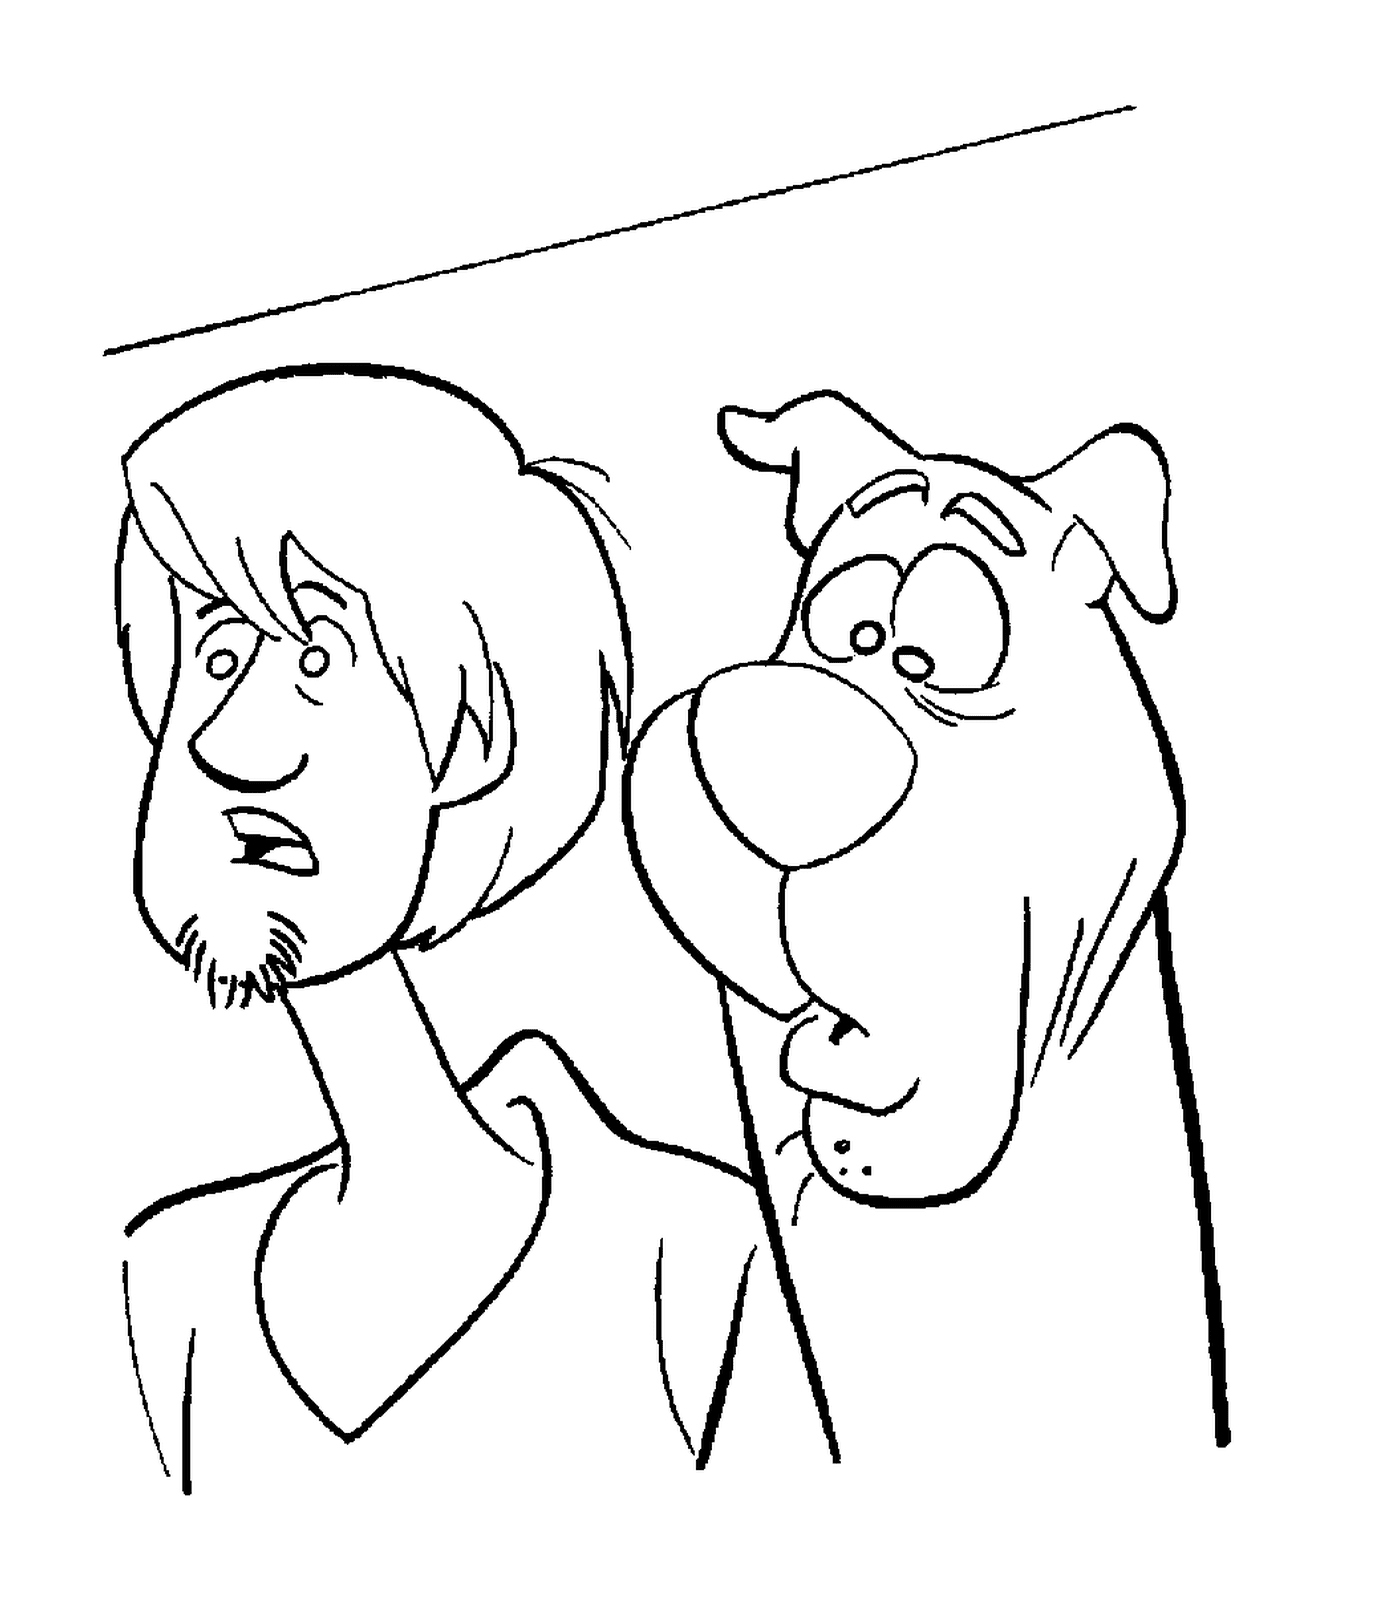  Shaggy and Scooby are lost 